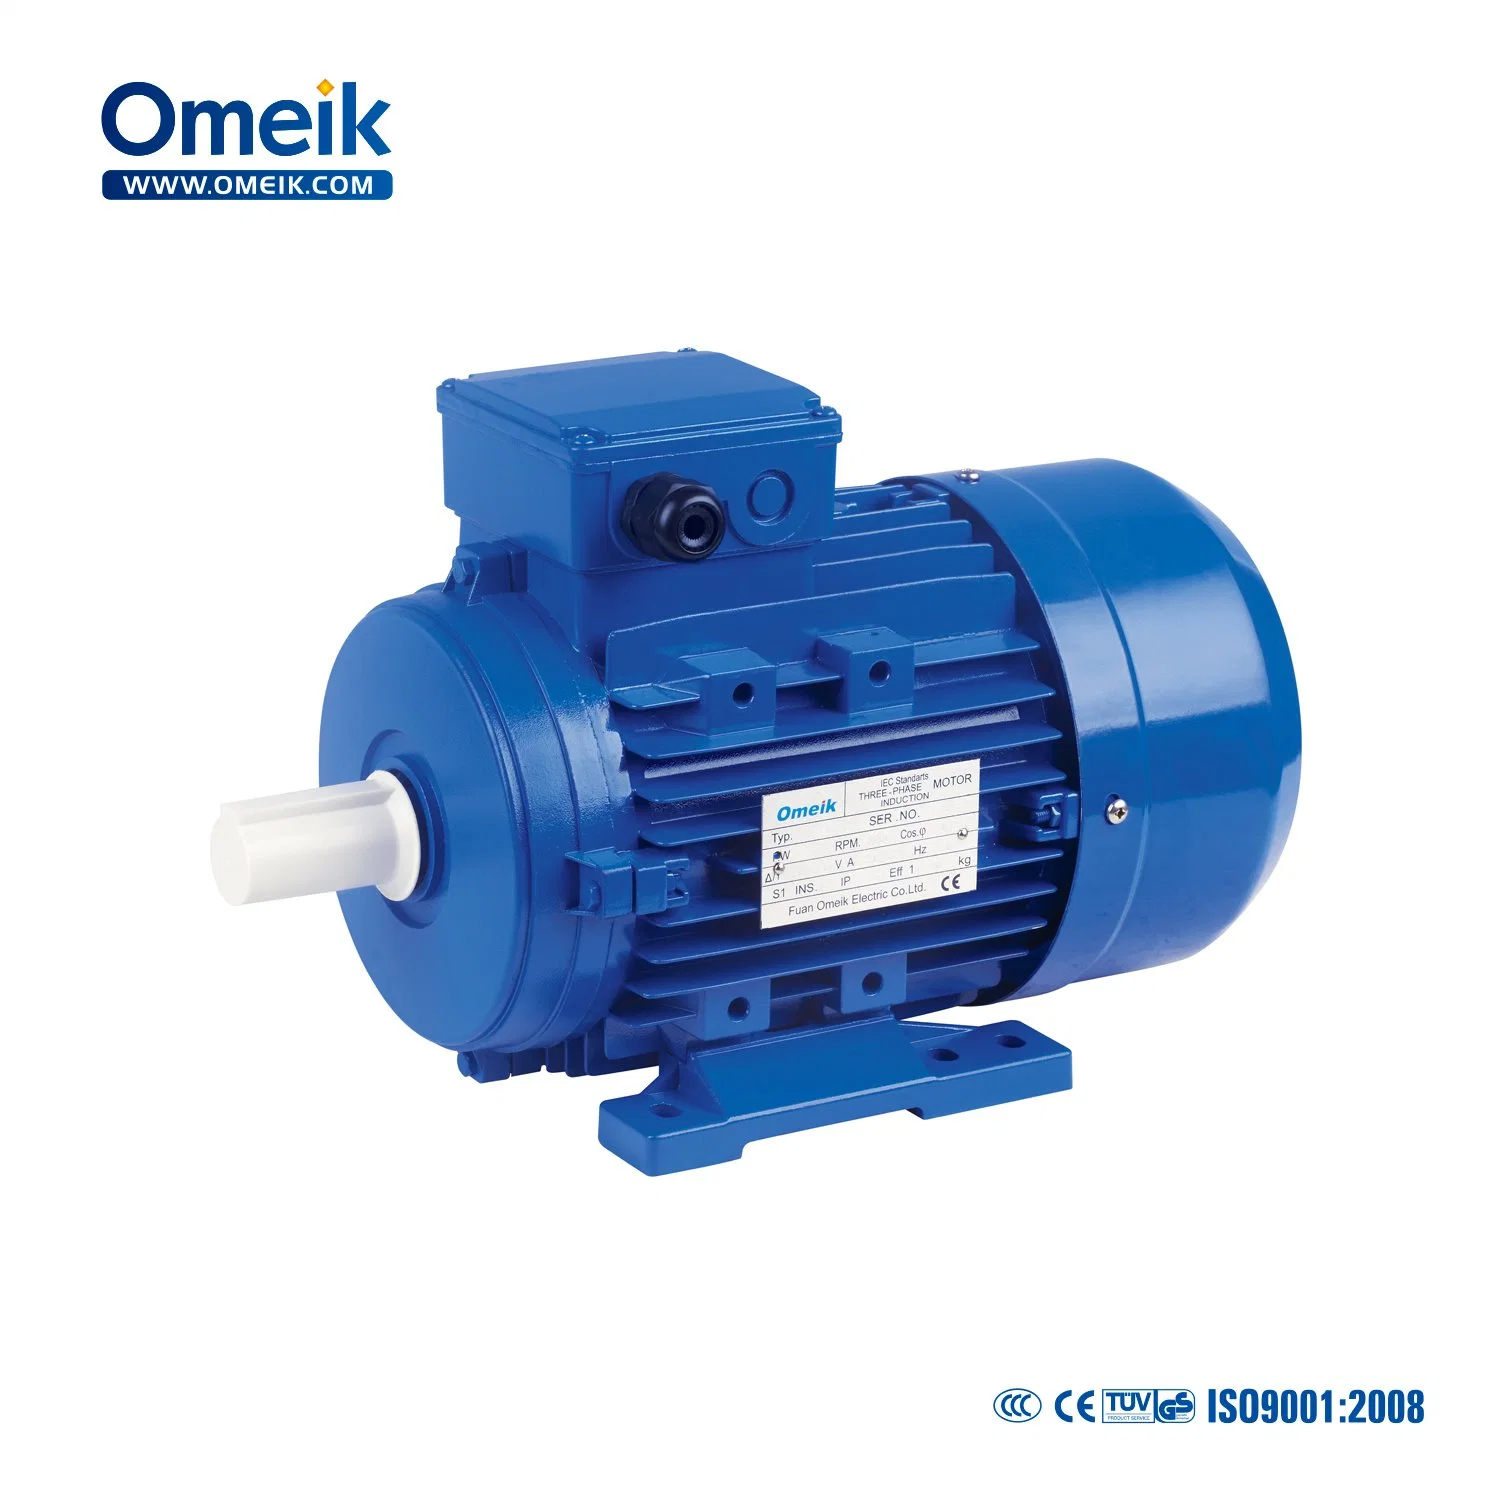 Ms 220/380V Super Silence High Speed Three Phase Electric Motor 4kw with Aluminium Housing